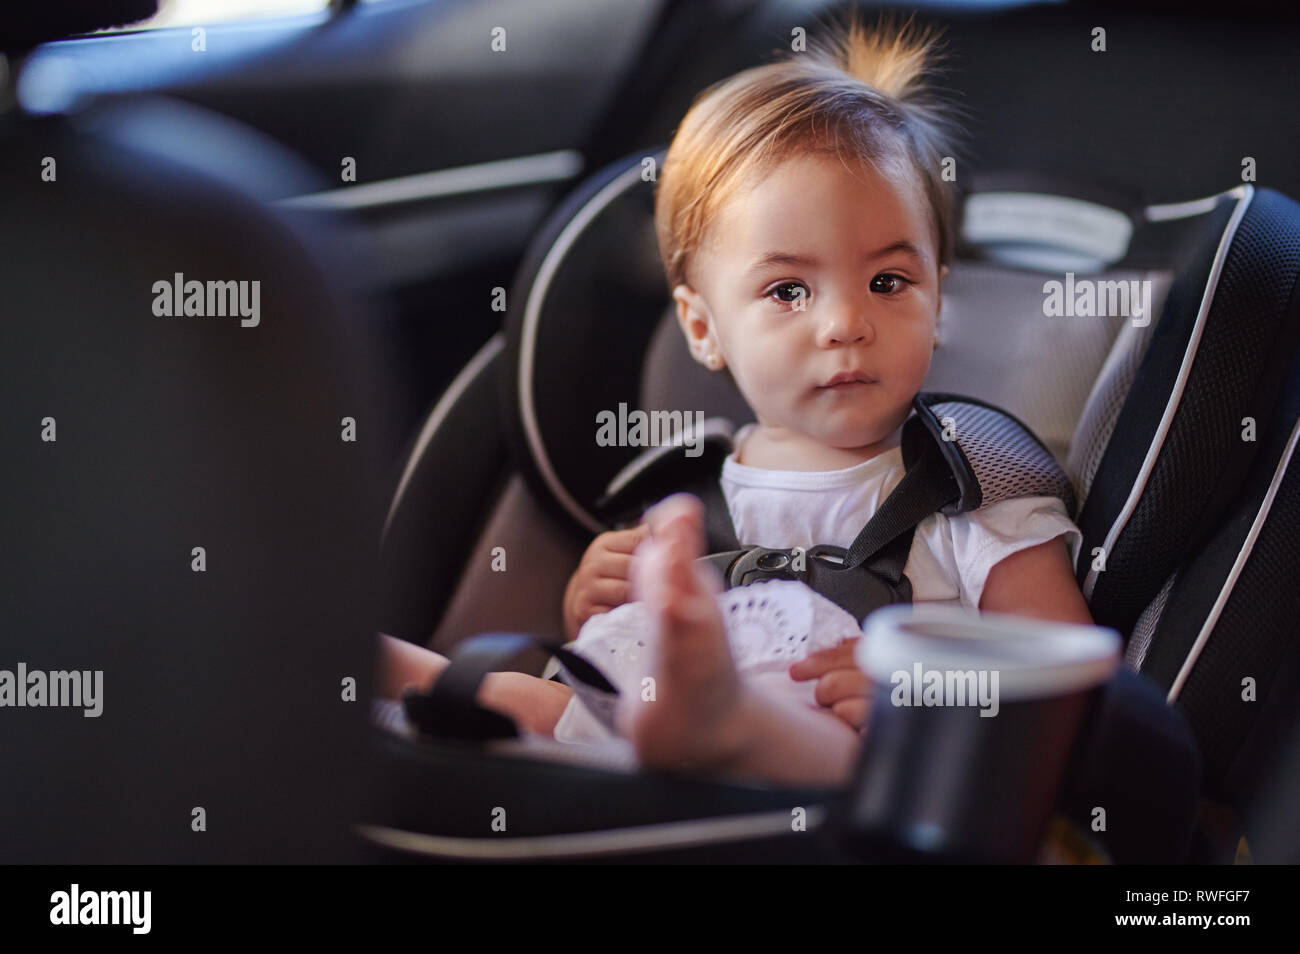 Cute baby girl in car seat looking in camera Stock Photo